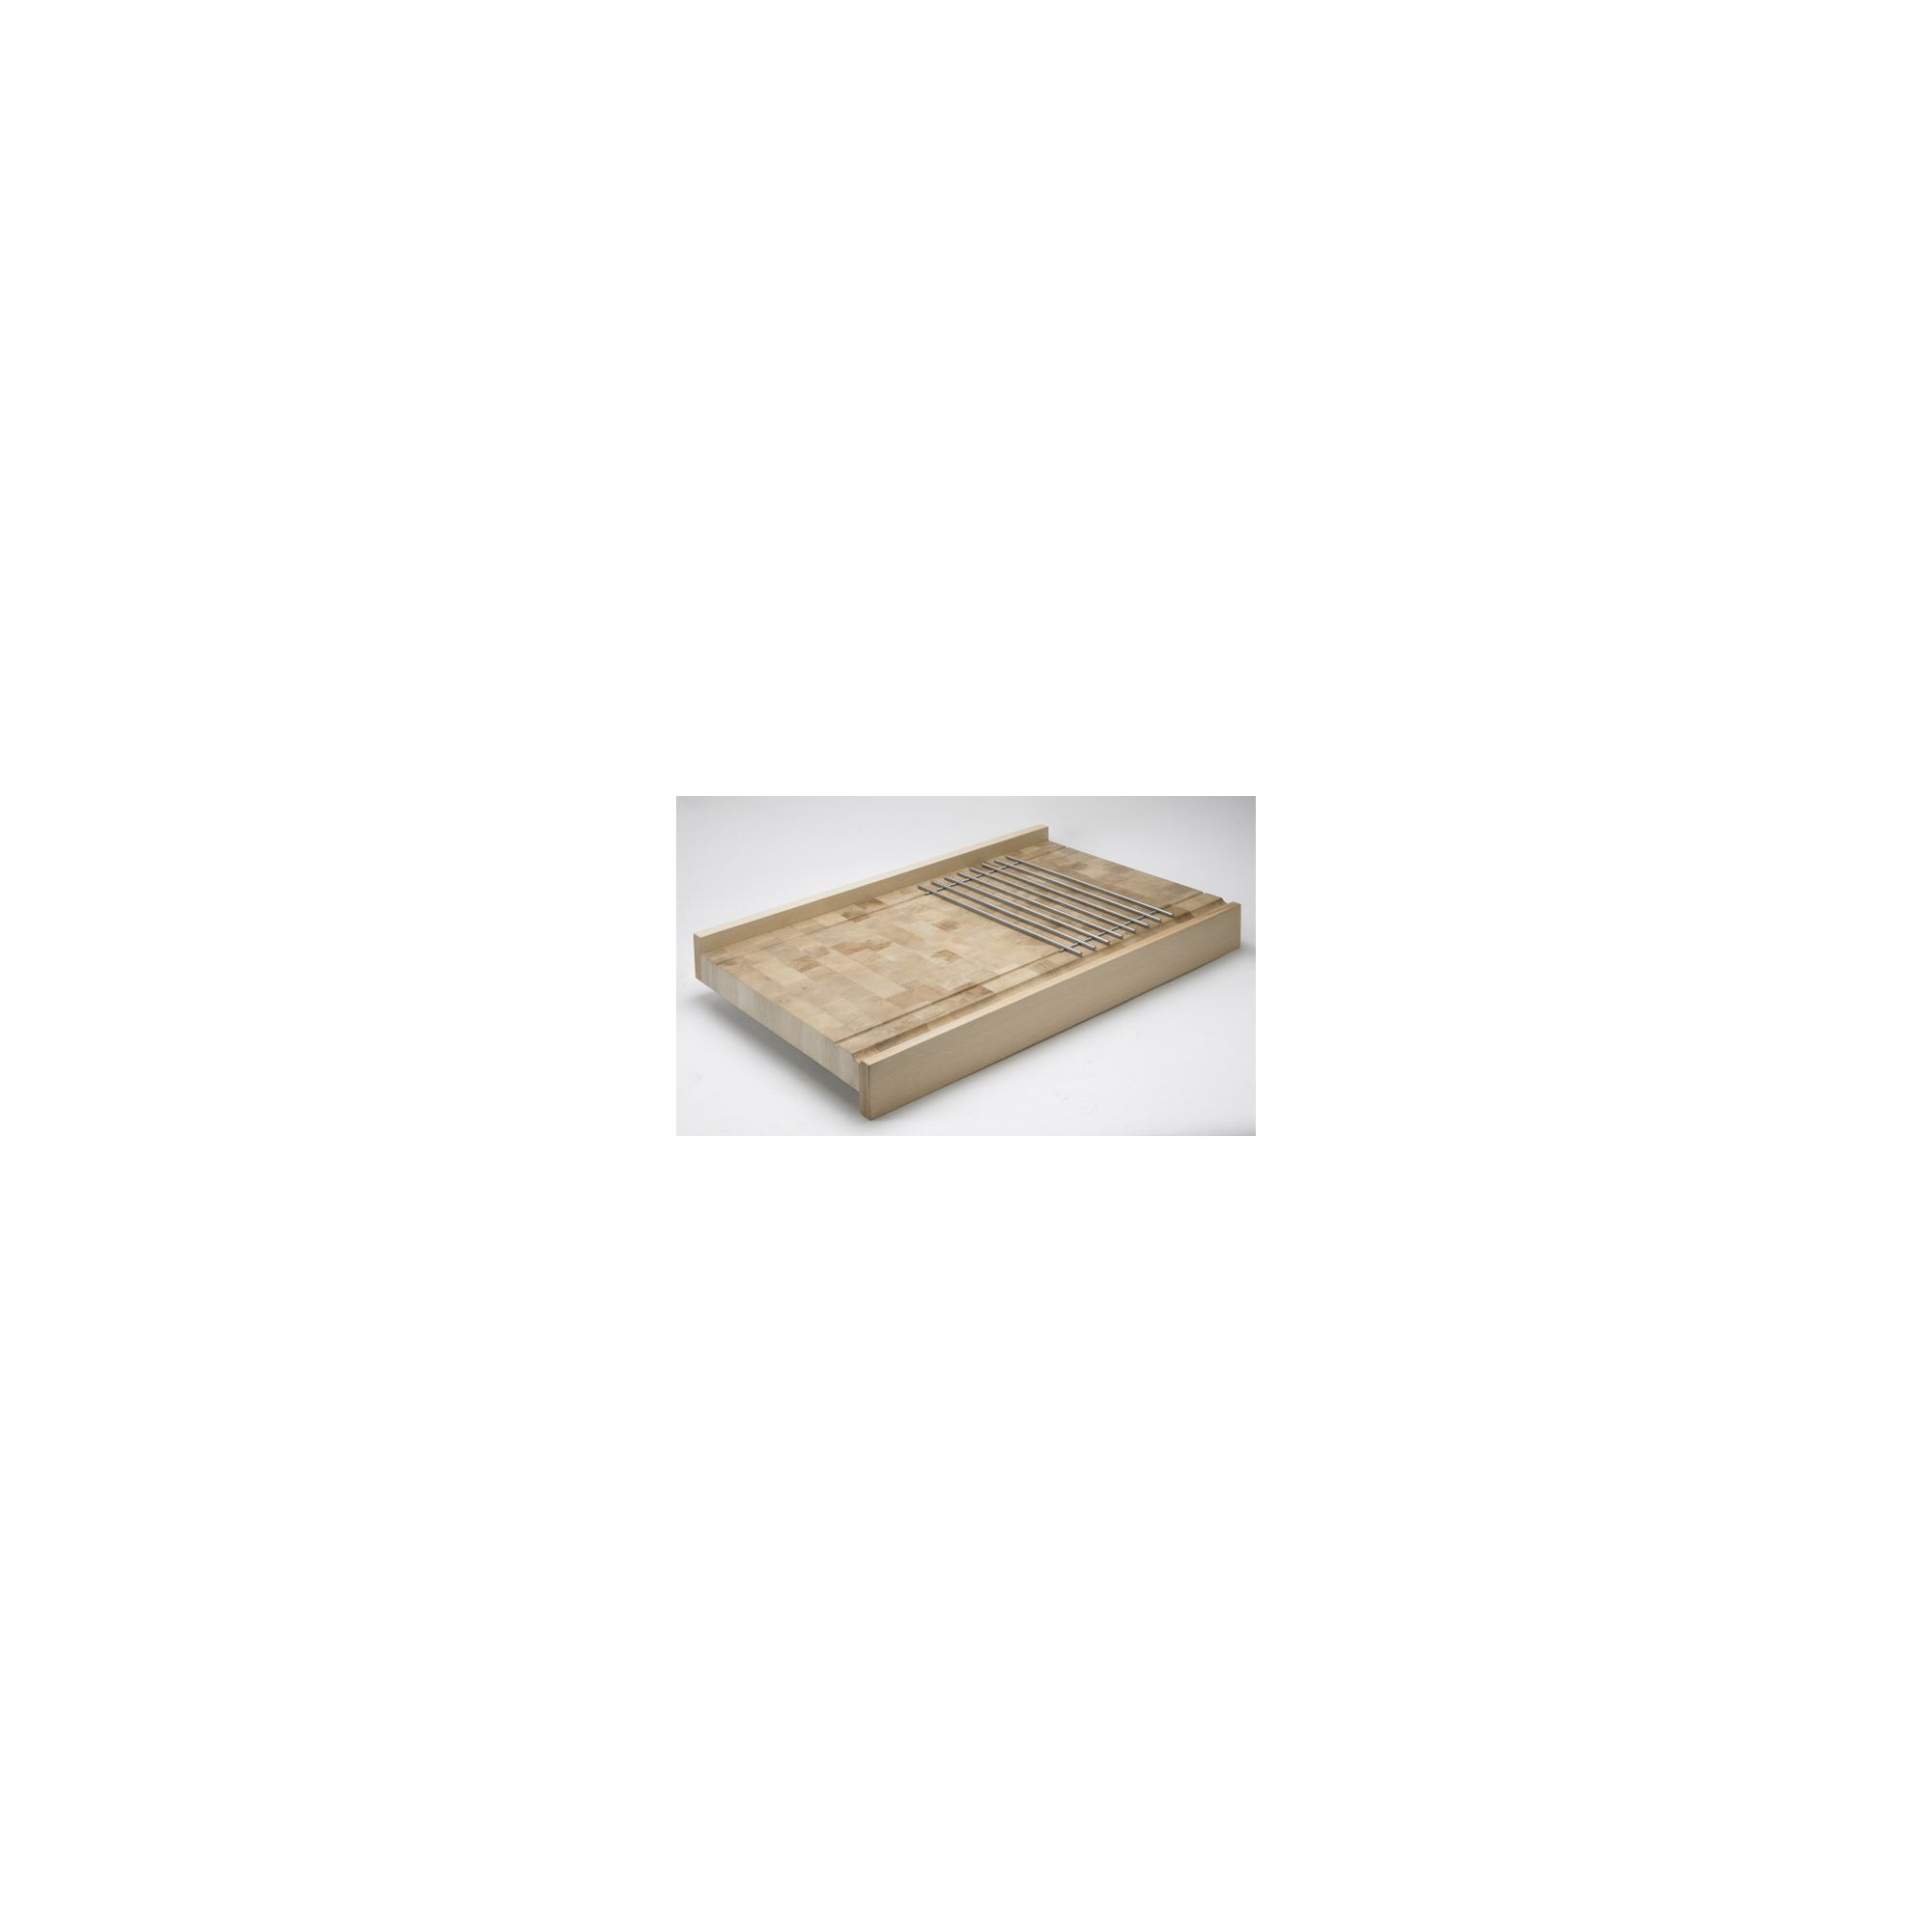 Chabret Stationary Worktop - 6cm X 80cm X 60cm at Tescos Direct